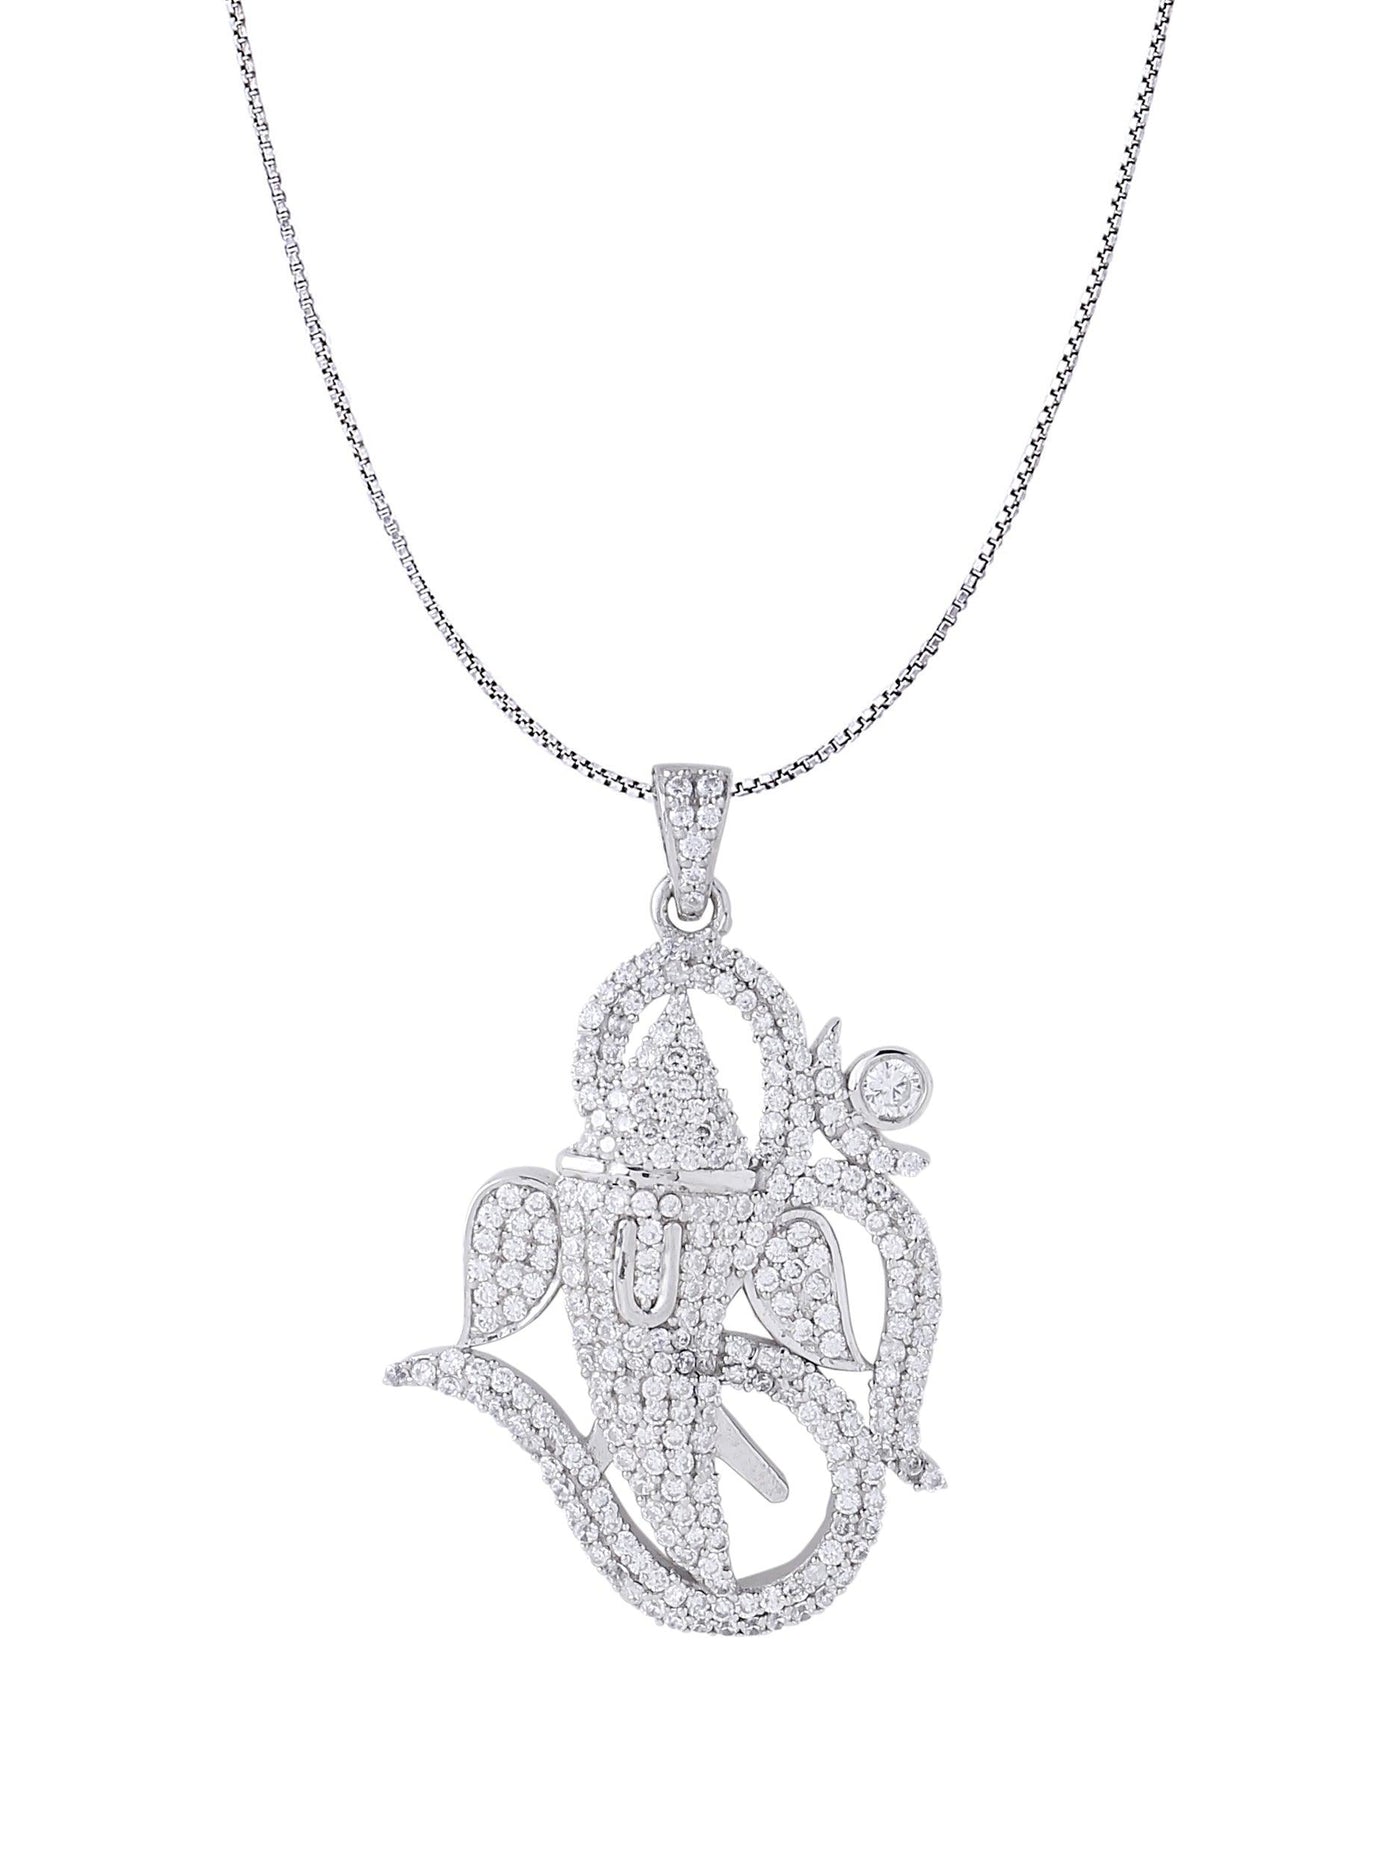 White Gold Color Ganesha Pendant Made of 925 Sterling Silver Material with 20 Inch Long Silver Chain